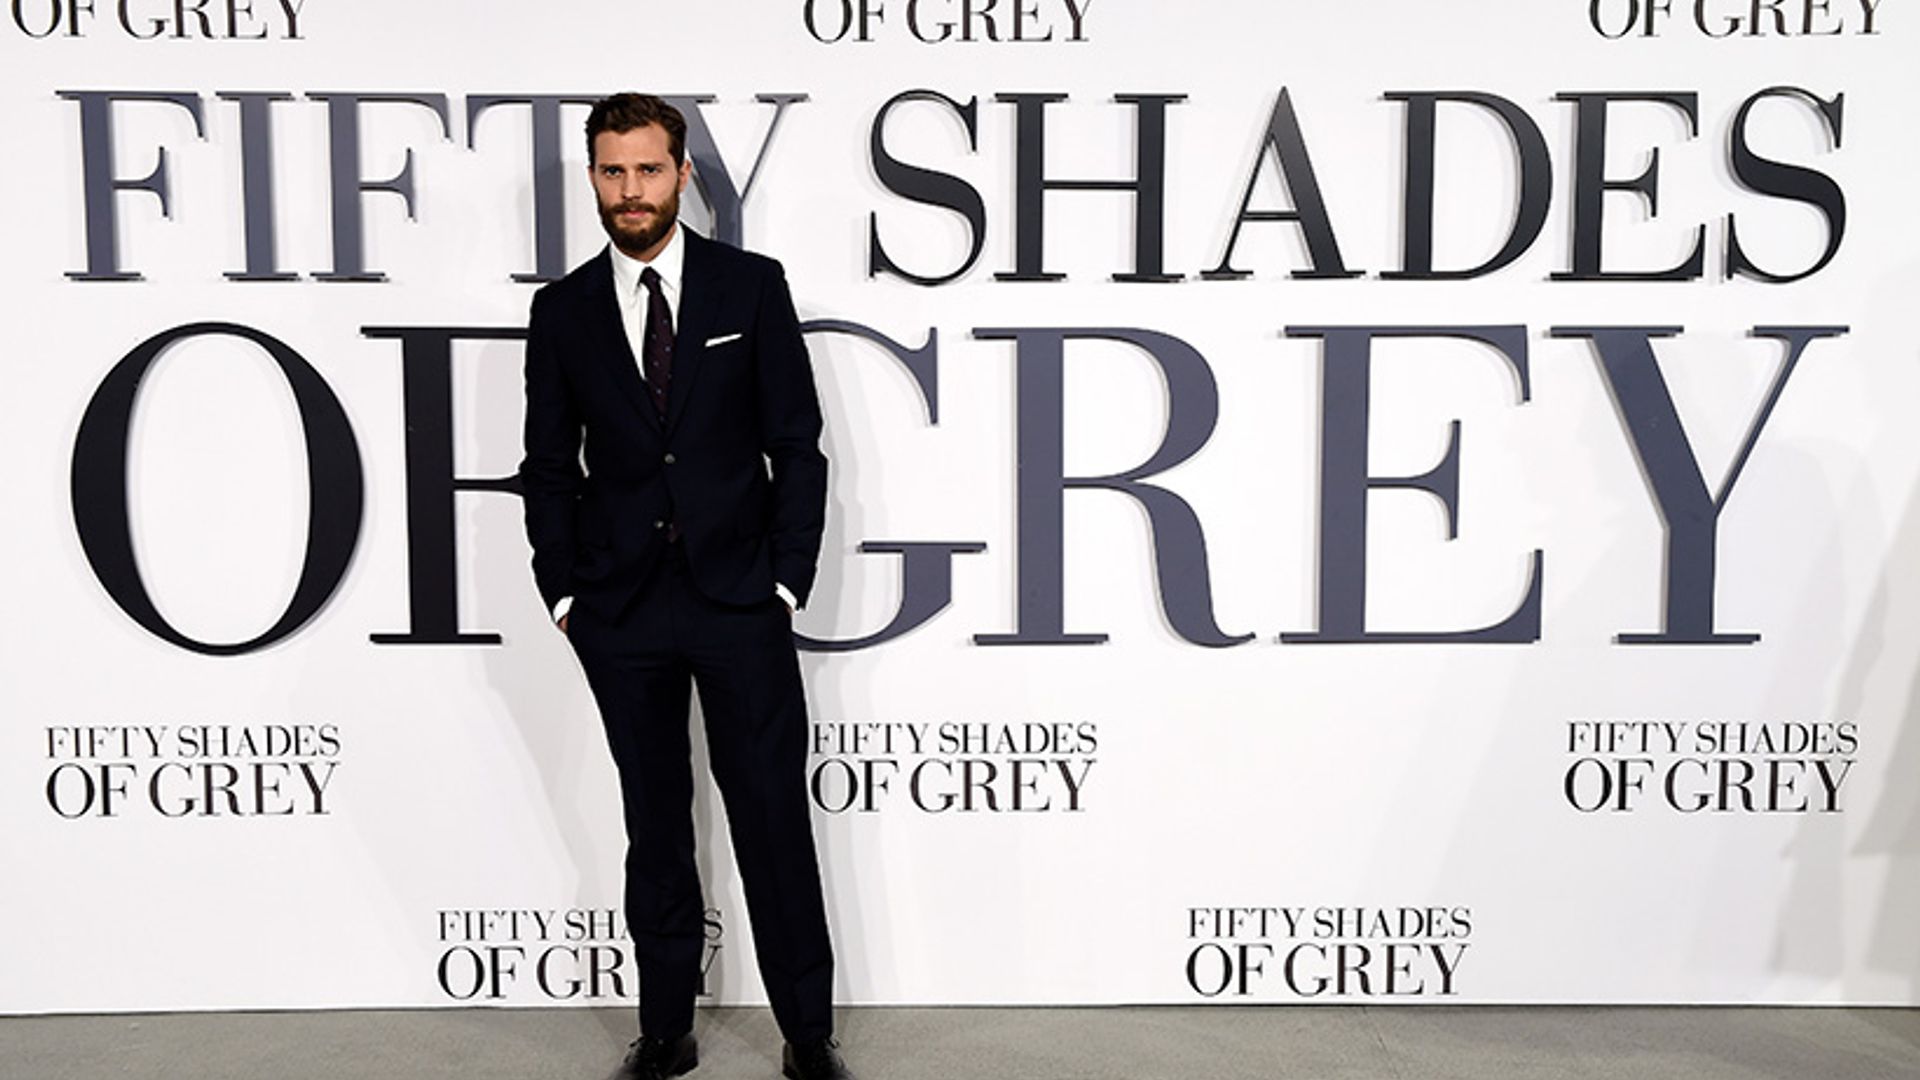 Jamie Dornan responds to reports he is leaving 50 Shades of Grey franchise